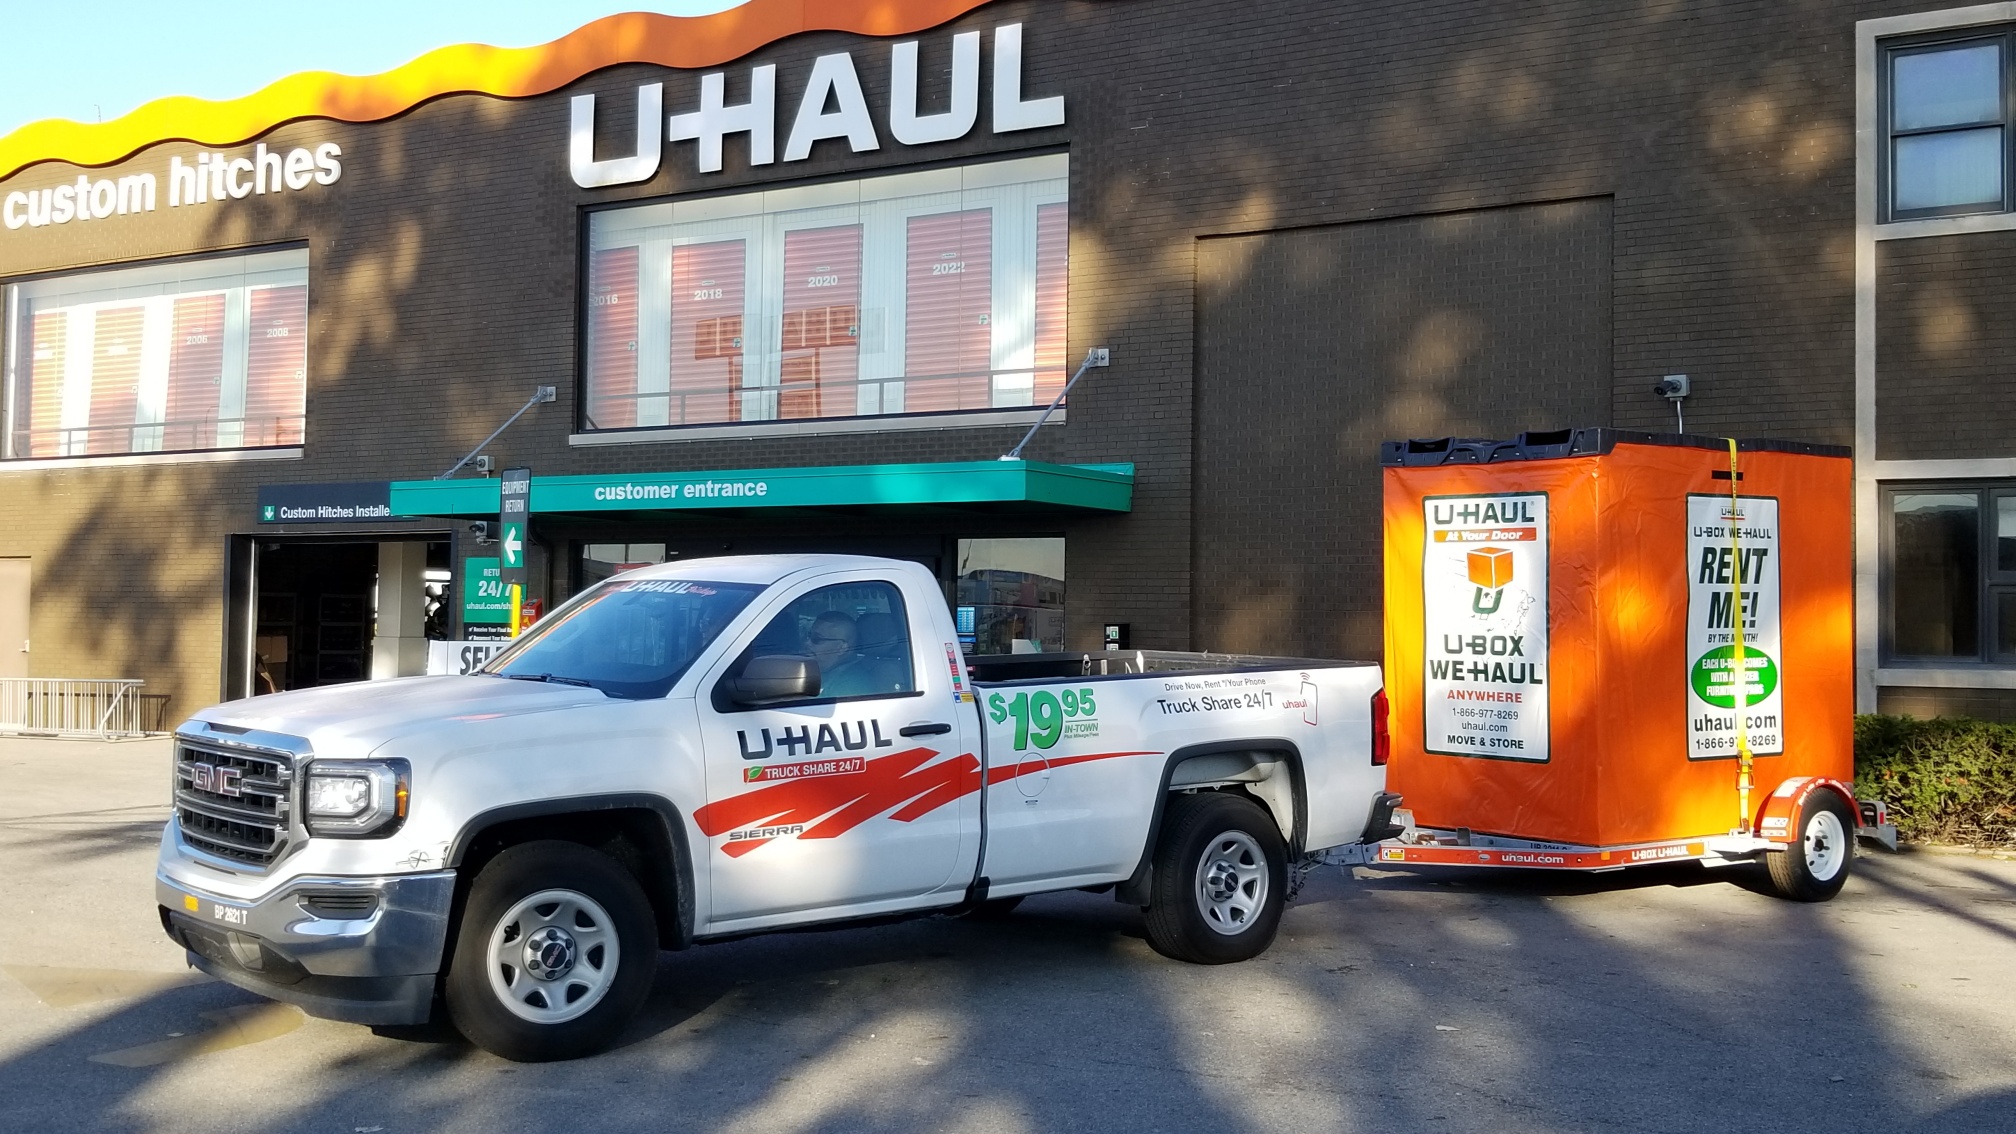 Museum Fire: U-Haul Offers Free U-Box Container Use in Flagstaff